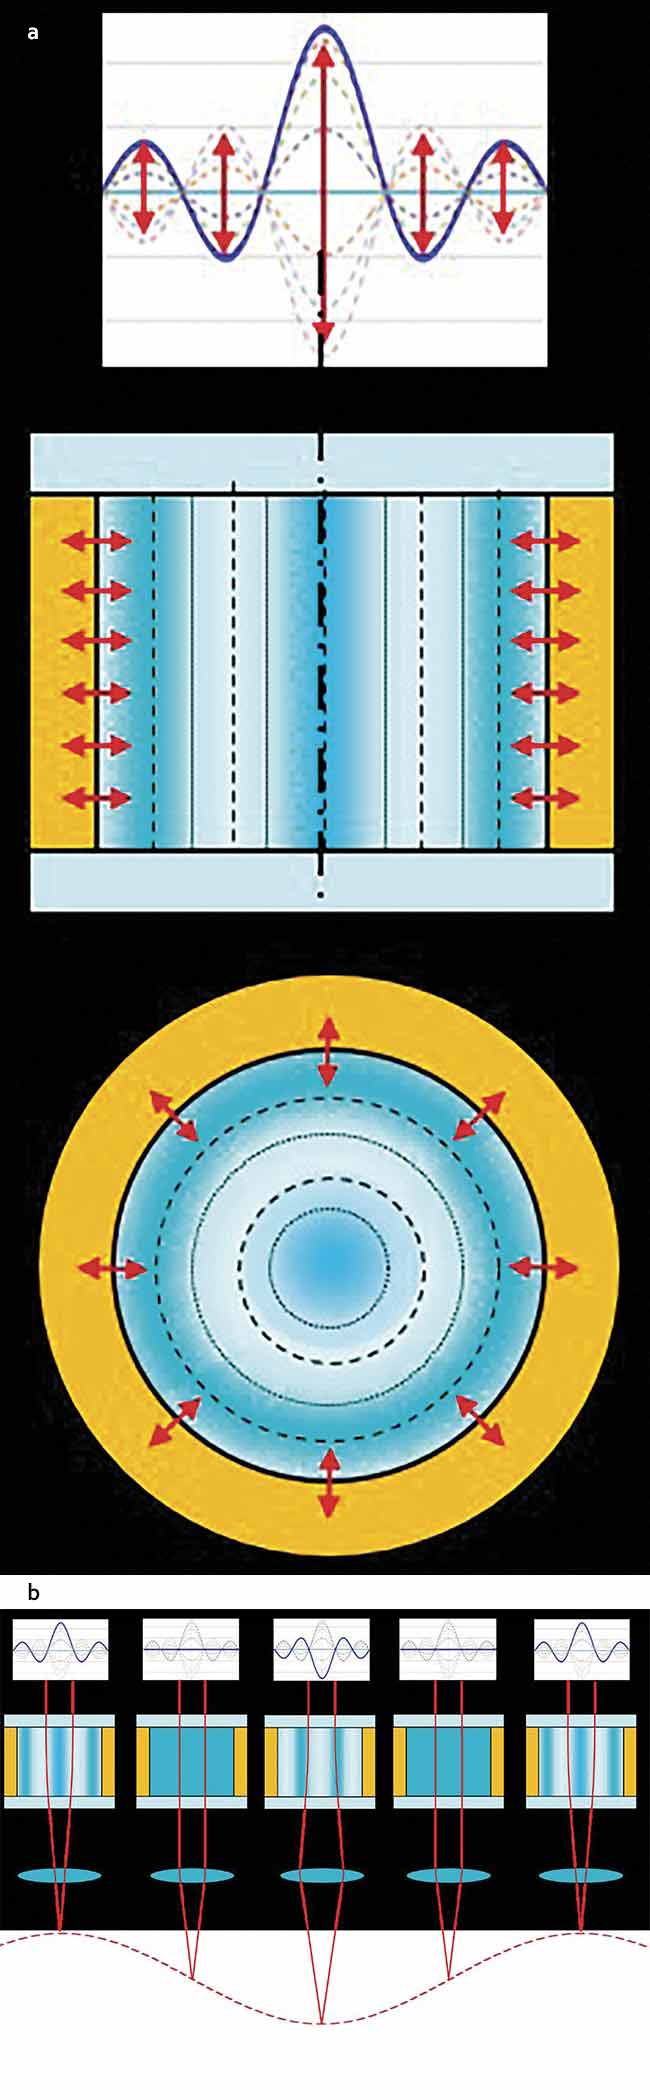 Figure 2. A TAG lens is formed by filling a cylindrical cavity with an optically transparent fluid. This type of lens samples all the focal lengths between the positive and negative extrema of the modulation (a). It can be combined with a microscope objective (b) or a different lens configuration, depending on the application. Courtesy of Mitutoyo.